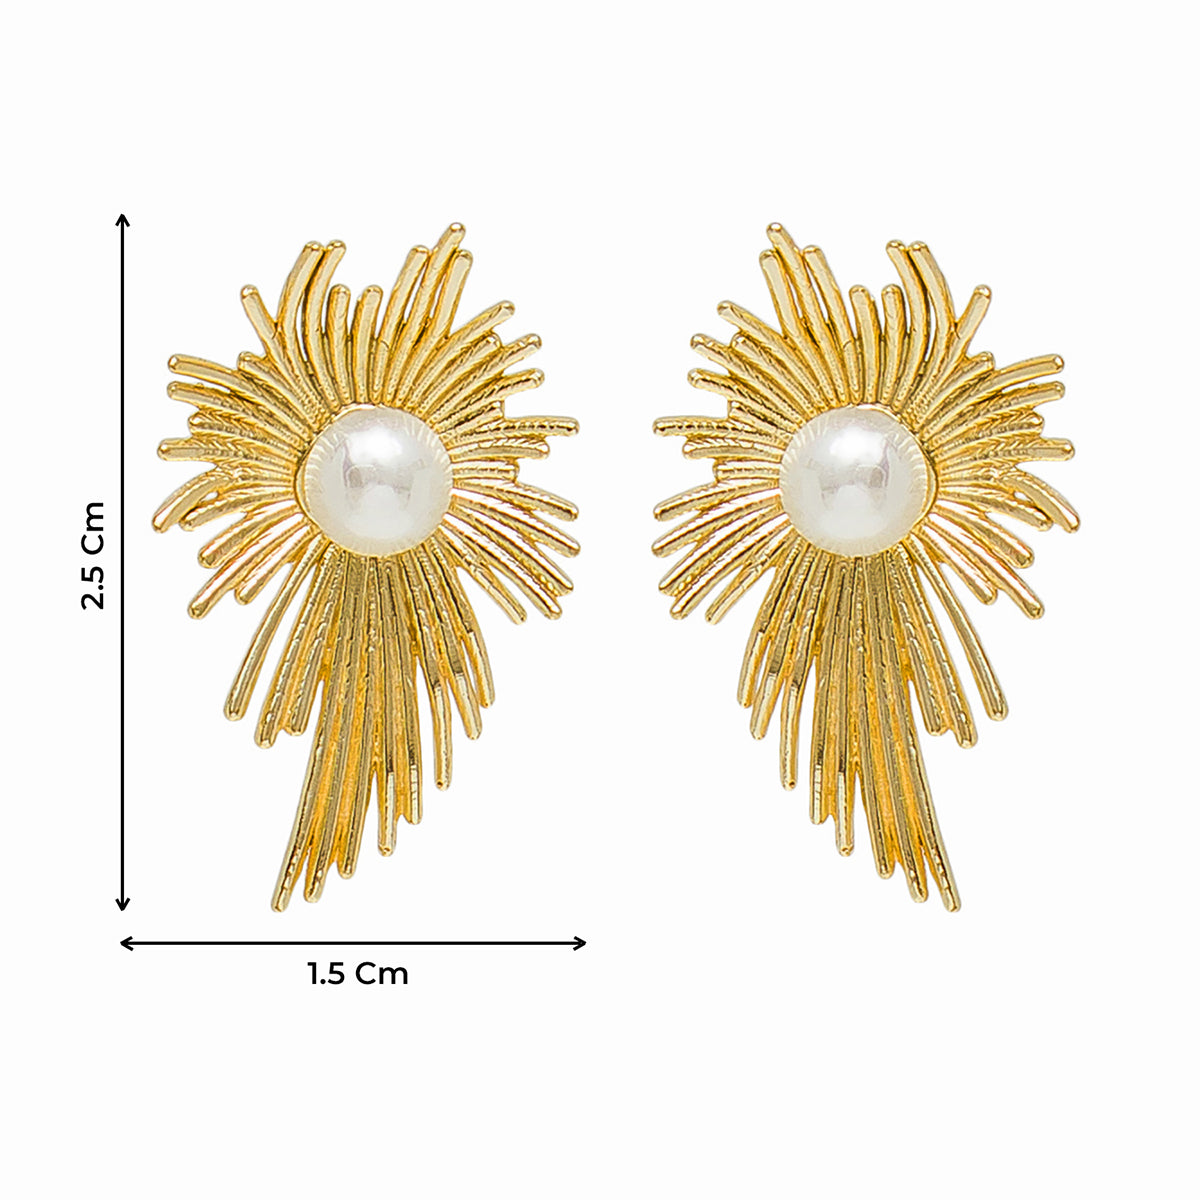 Festive Spikey Flora Gold Earrings with Pearls